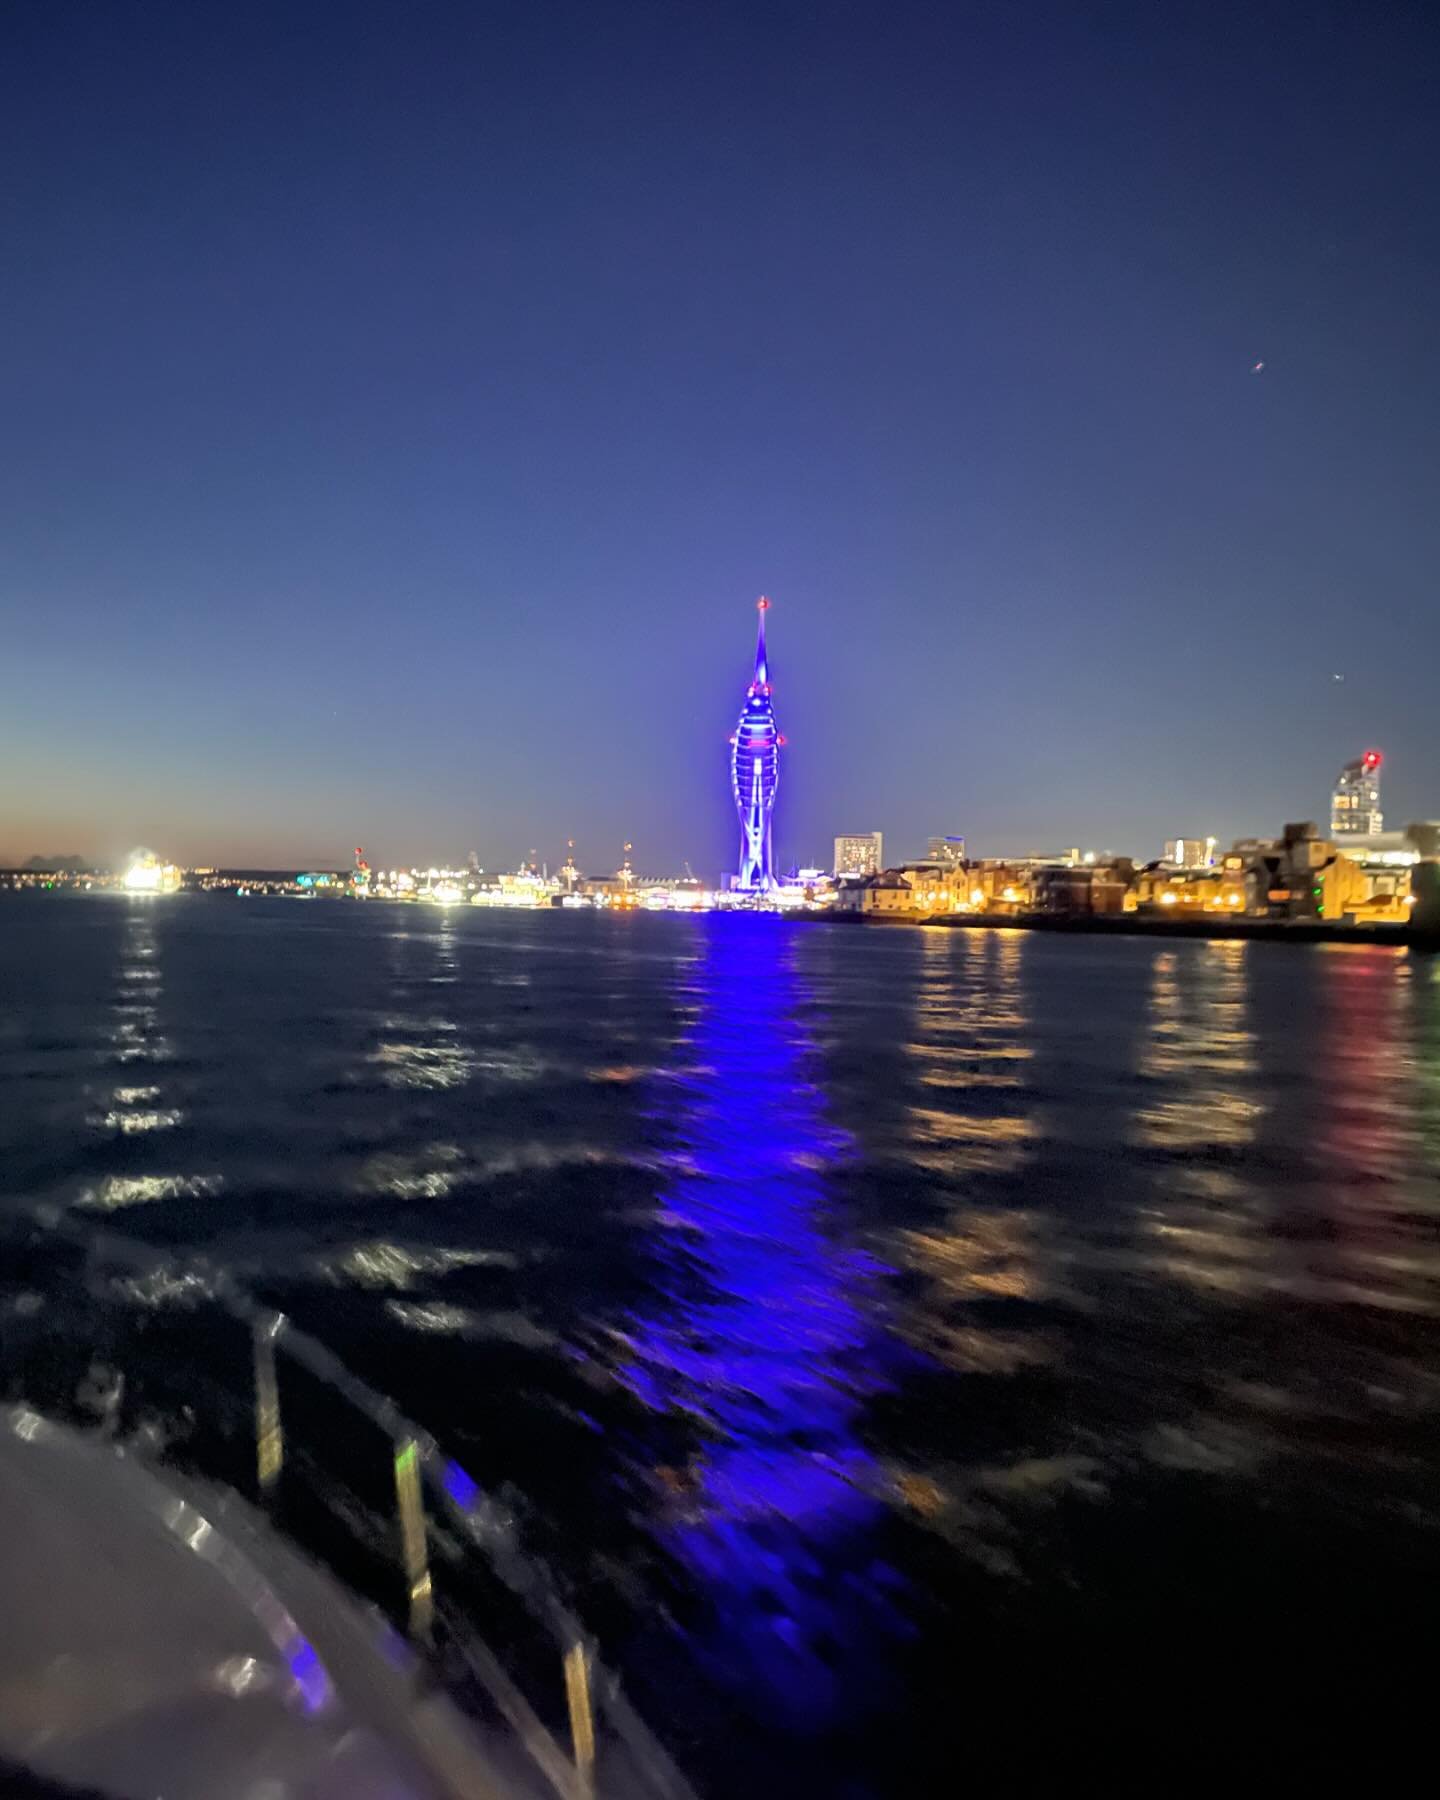 My camera is doing some funky stuff on the way back into Portsmouth Harbour tonight @portsmouth.chi.marine.training 🛥️ #portsmouth #gunwharfquays #gunwharf #spinnakertower #boatlife